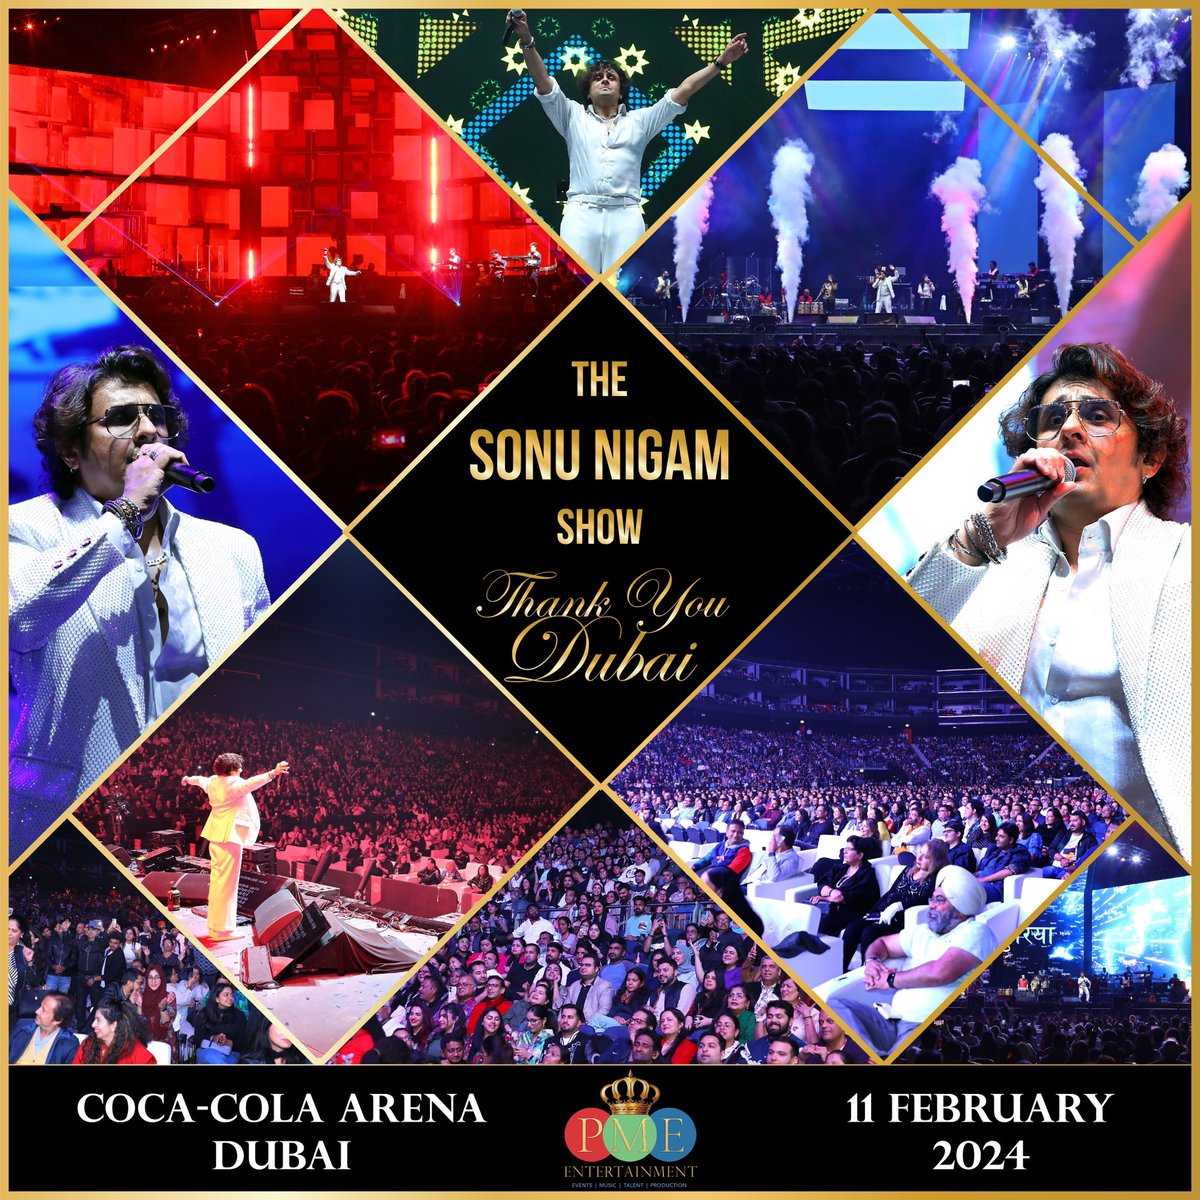 THANK YOU DUBAI! 🇦🇪🫶🏼 Meteora Developers Presents “The Sonu Nigam Show,” at the Coca-Cola Arena on February 11, 2024. Another signature event by PME Entertainment - Asia’s No.1 Live Entertainment Company. An event by: @PMEWorld #SonuNigam #SonuNigamLive #TheSonuNigamShow